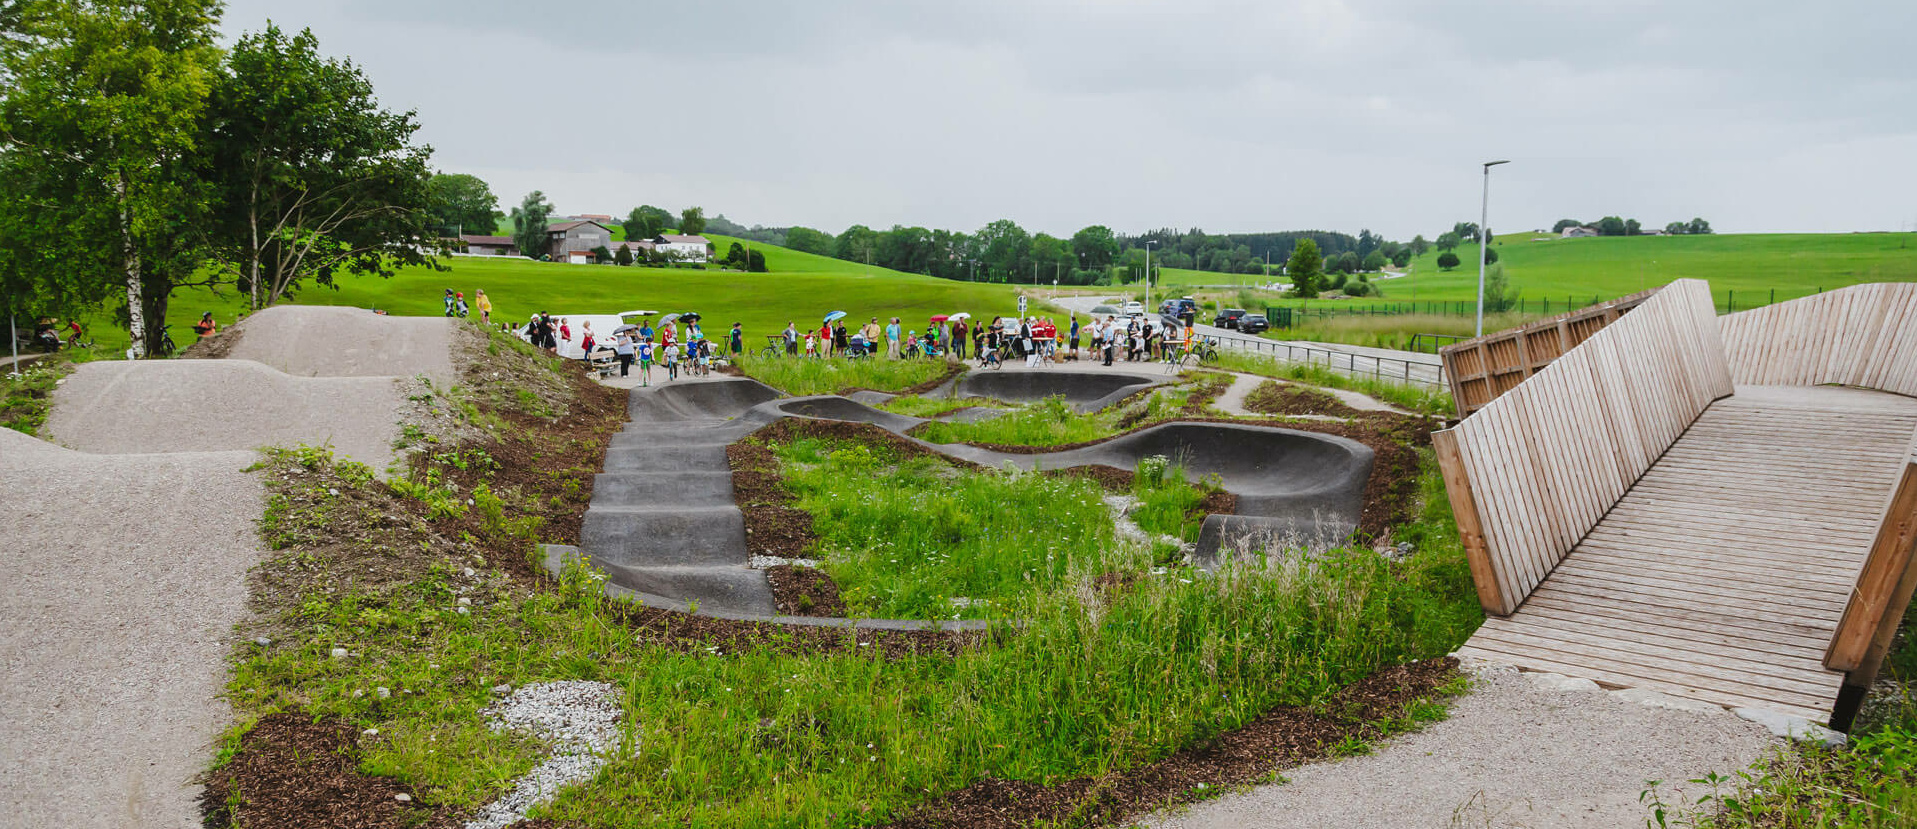 Overview of pump track Betzigau with bridge